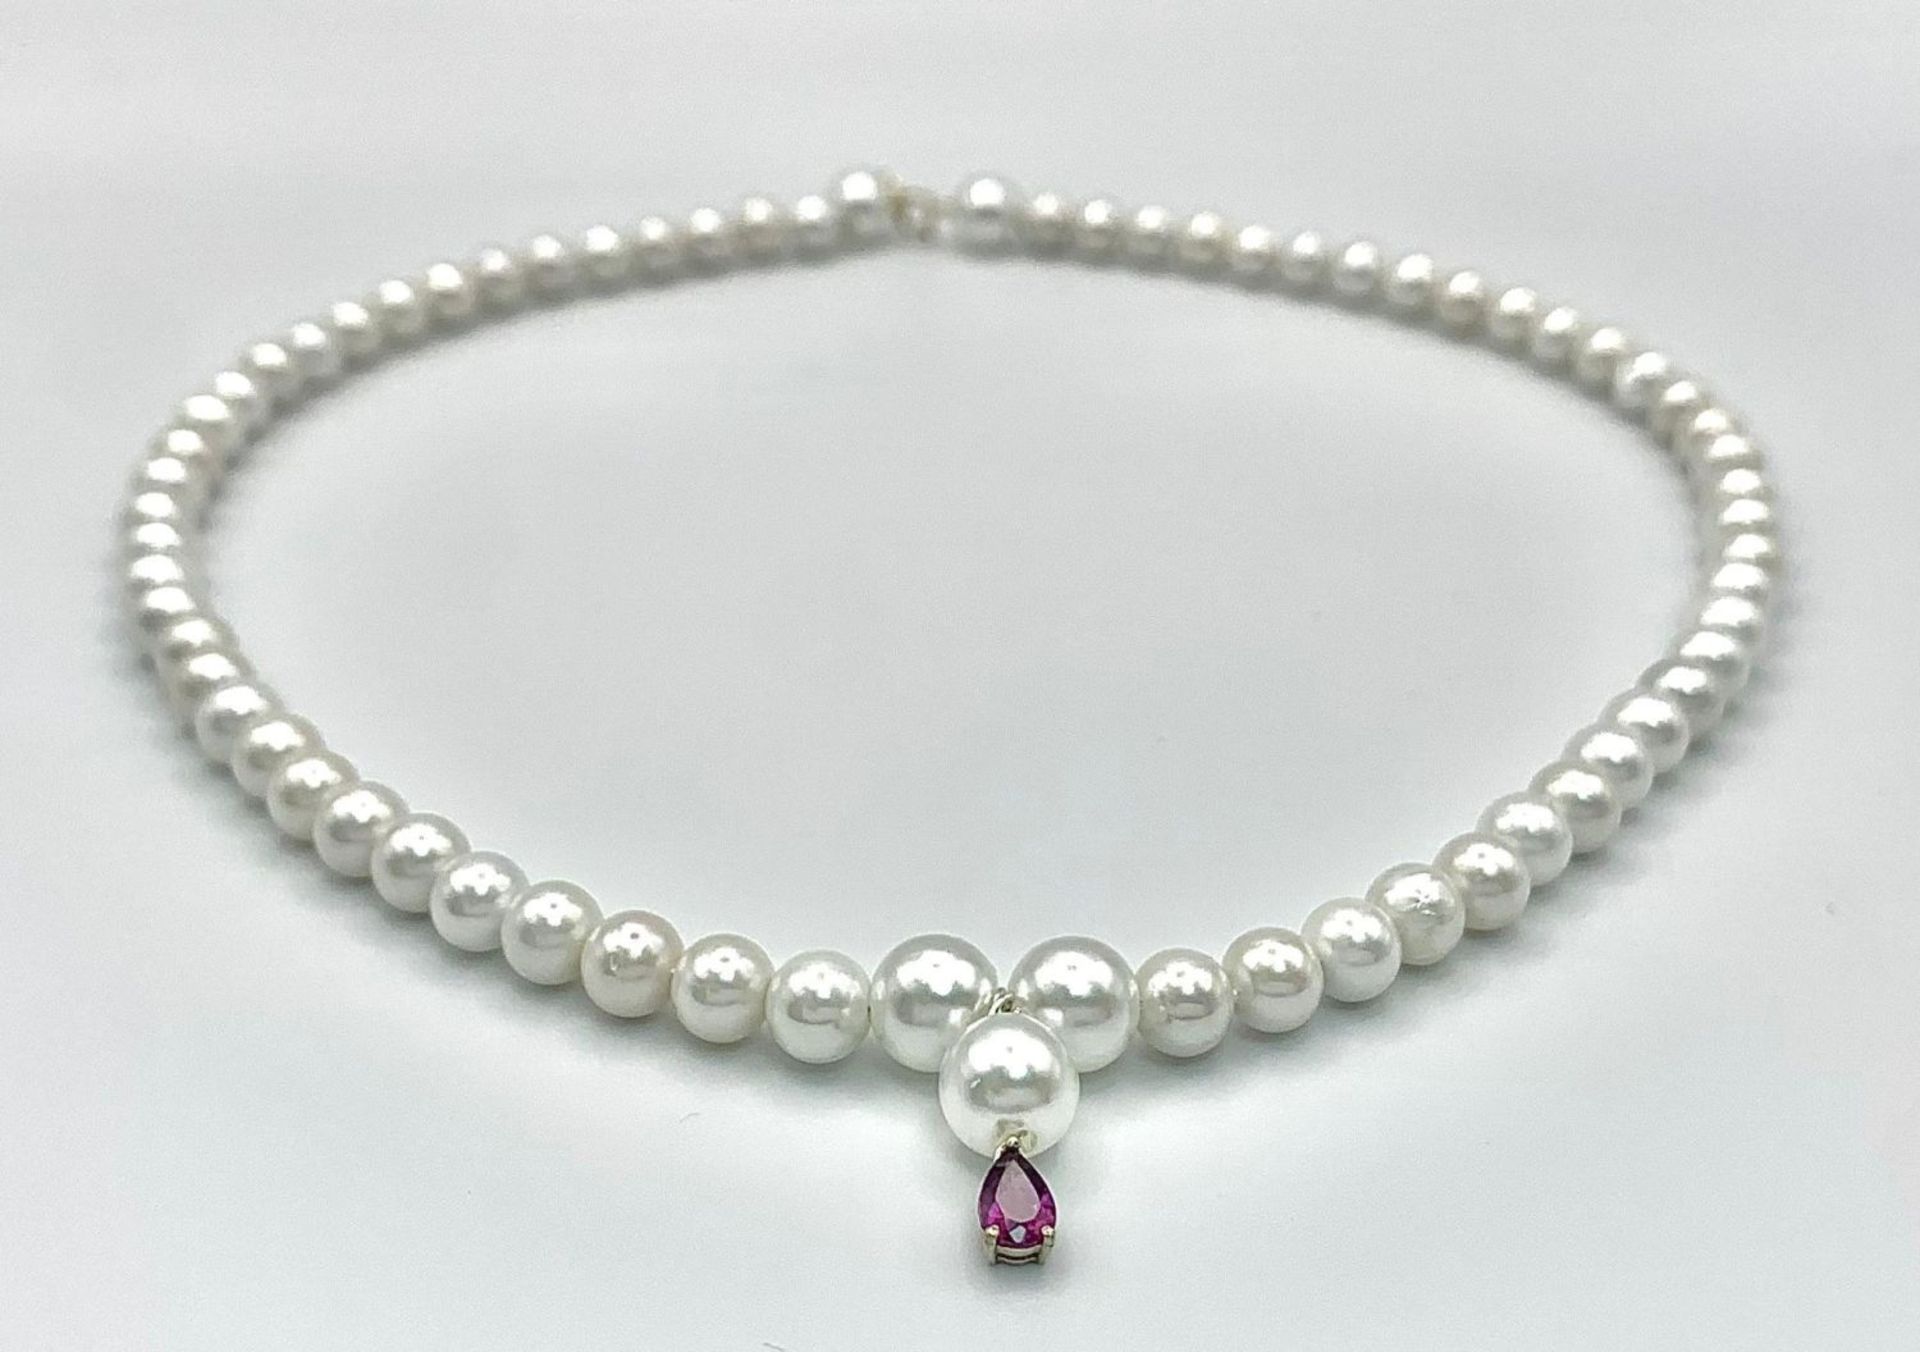 A faux pearl necklace with a 14 K yellow gold clasp and a small amethyst pendant. Length: 43 cm, - Bild 3 aus 7